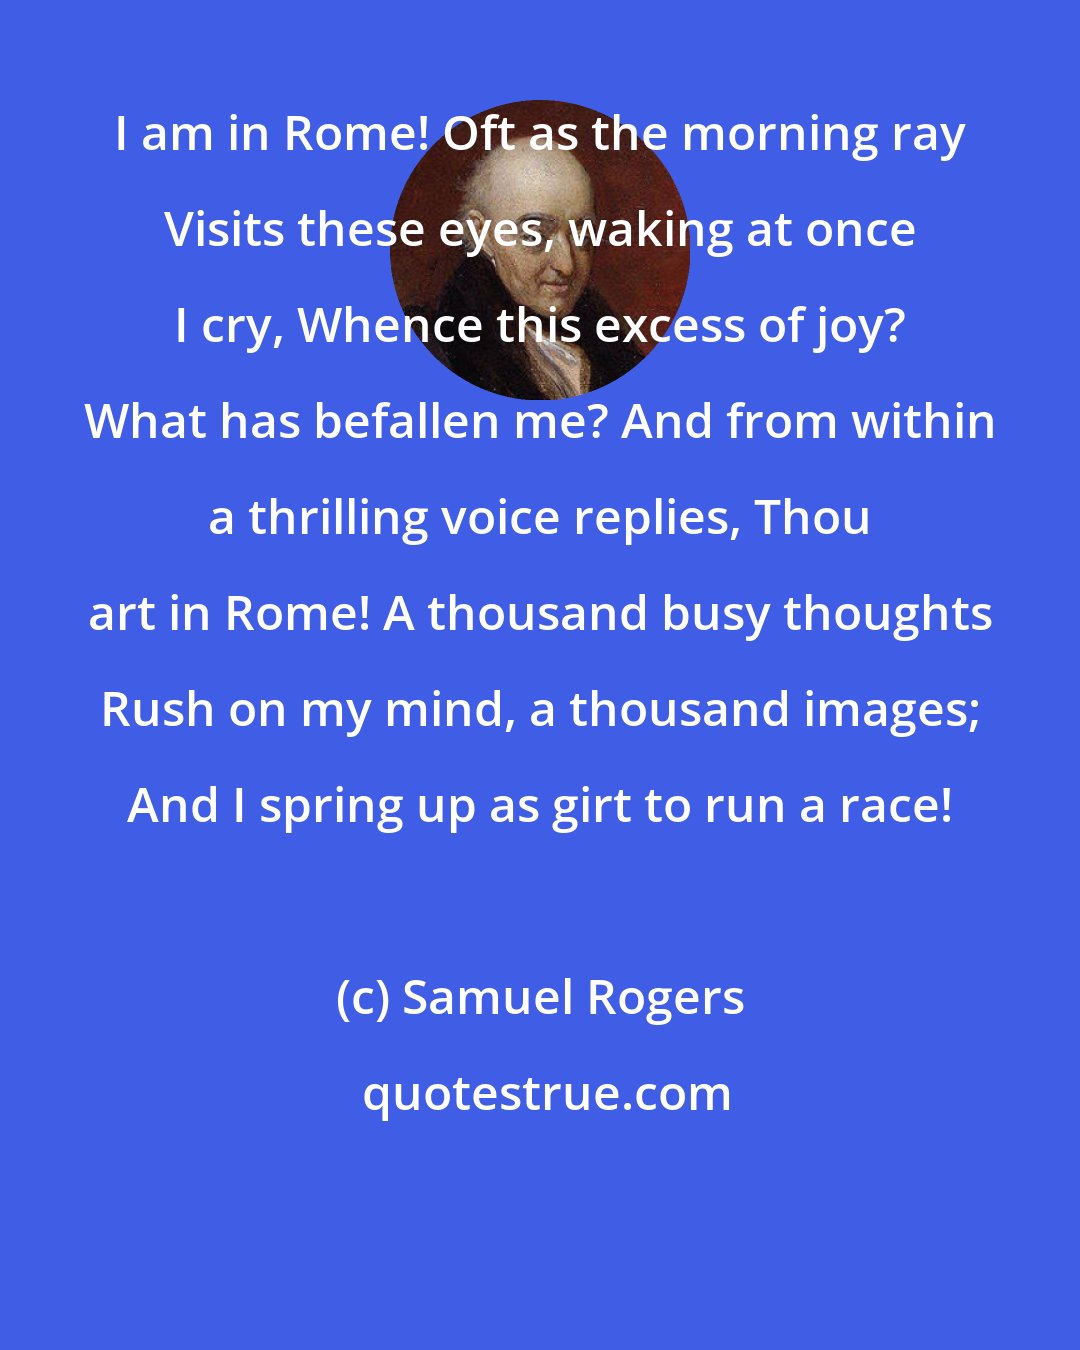 Samuel Rogers: I am in Rome! Oft as the morning ray Visits these eyes, waking at once I cry, Whence this excess of joy? What has befallen me? And from within a thrilling voice replies, Thou art in Rome! A thousand busy thoughts Rush on my mind, a thousand images; And I spring up as girt to run a race!